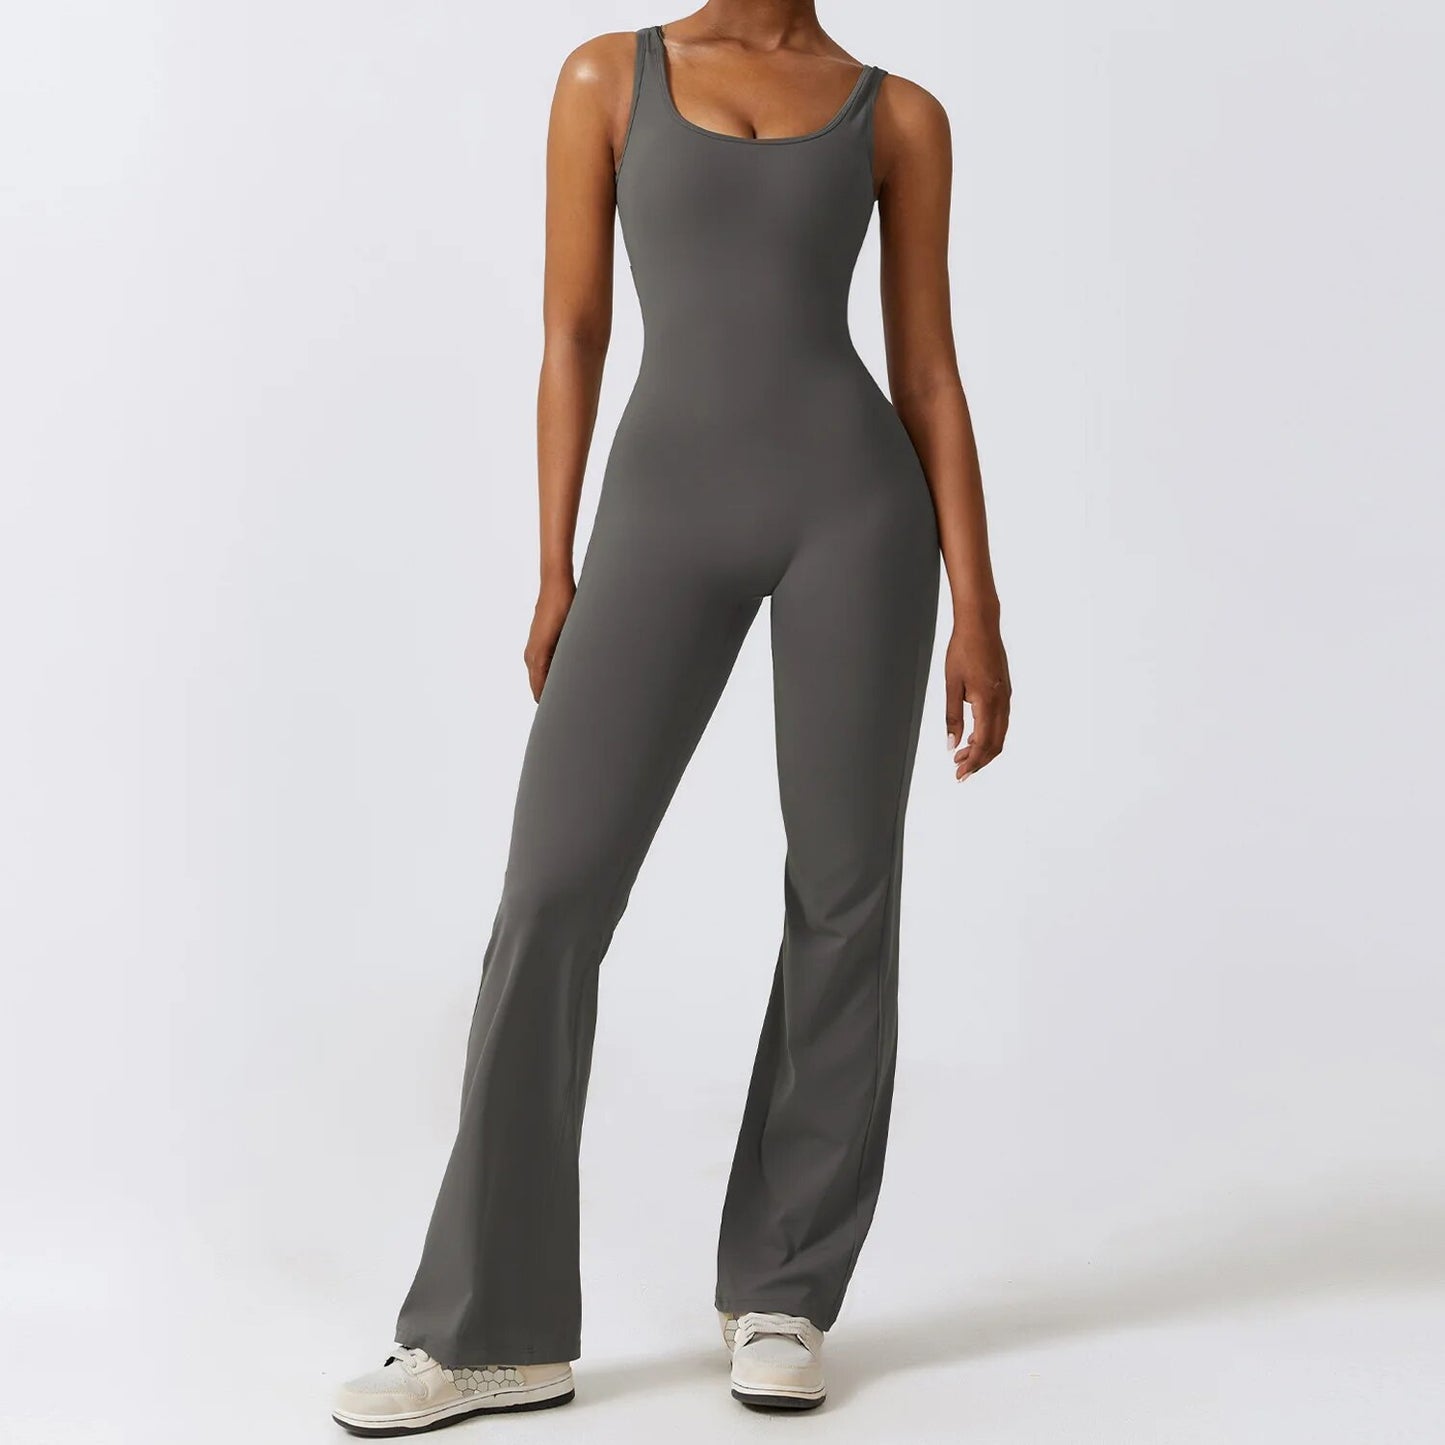 One Piece Open Back High Quality Yoga Tracksuits For Women